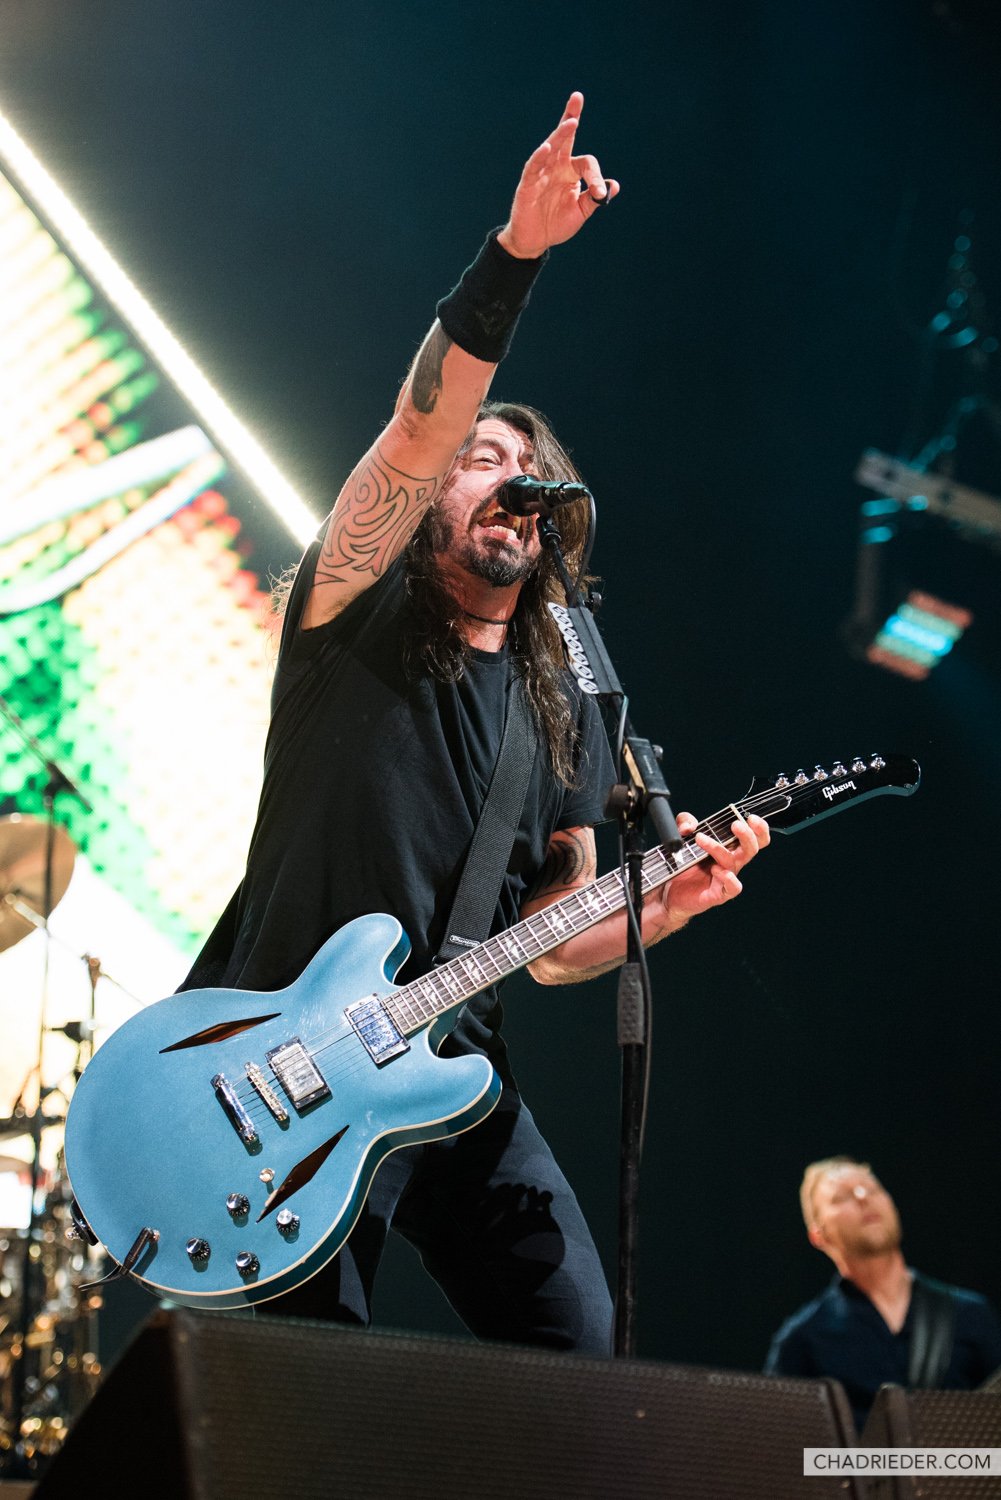 Foo Fighters Dave Grohl